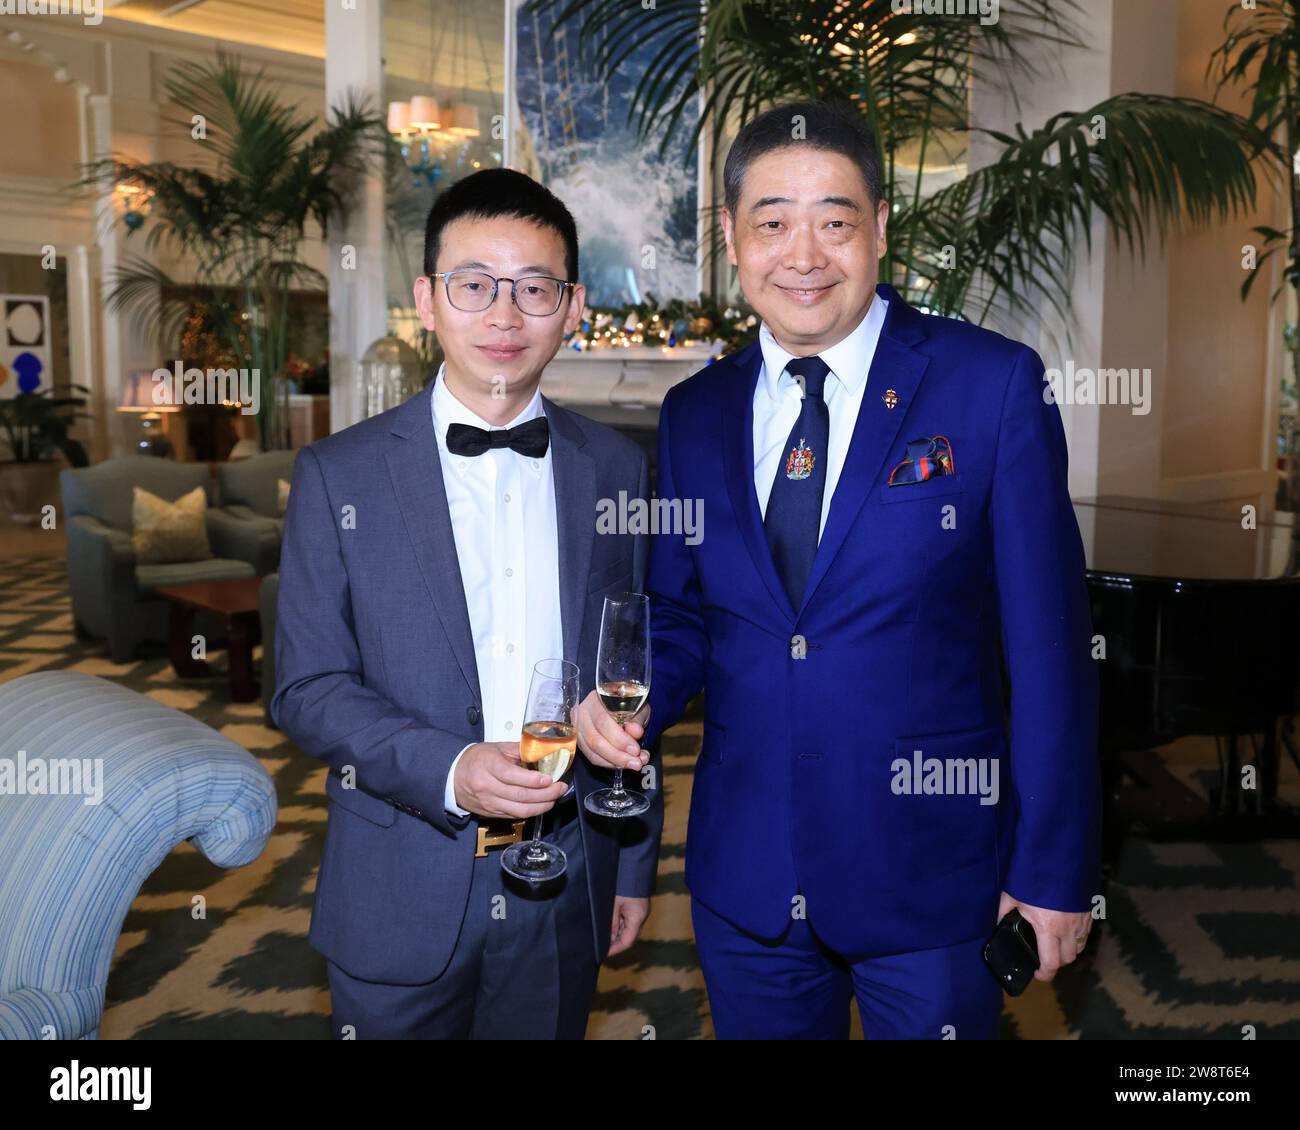 Santa Monica, California, USA. 17th December, 2023. Professor Lingyun Xiang and TV host Joey Zhou attending the Royal Society of St. George, California Branch, Holiday Celebration and Awards Ceremony at the Casa Del Mar Hotel in Santa Monica, California. Credit: Sheri Determan Stock Photo